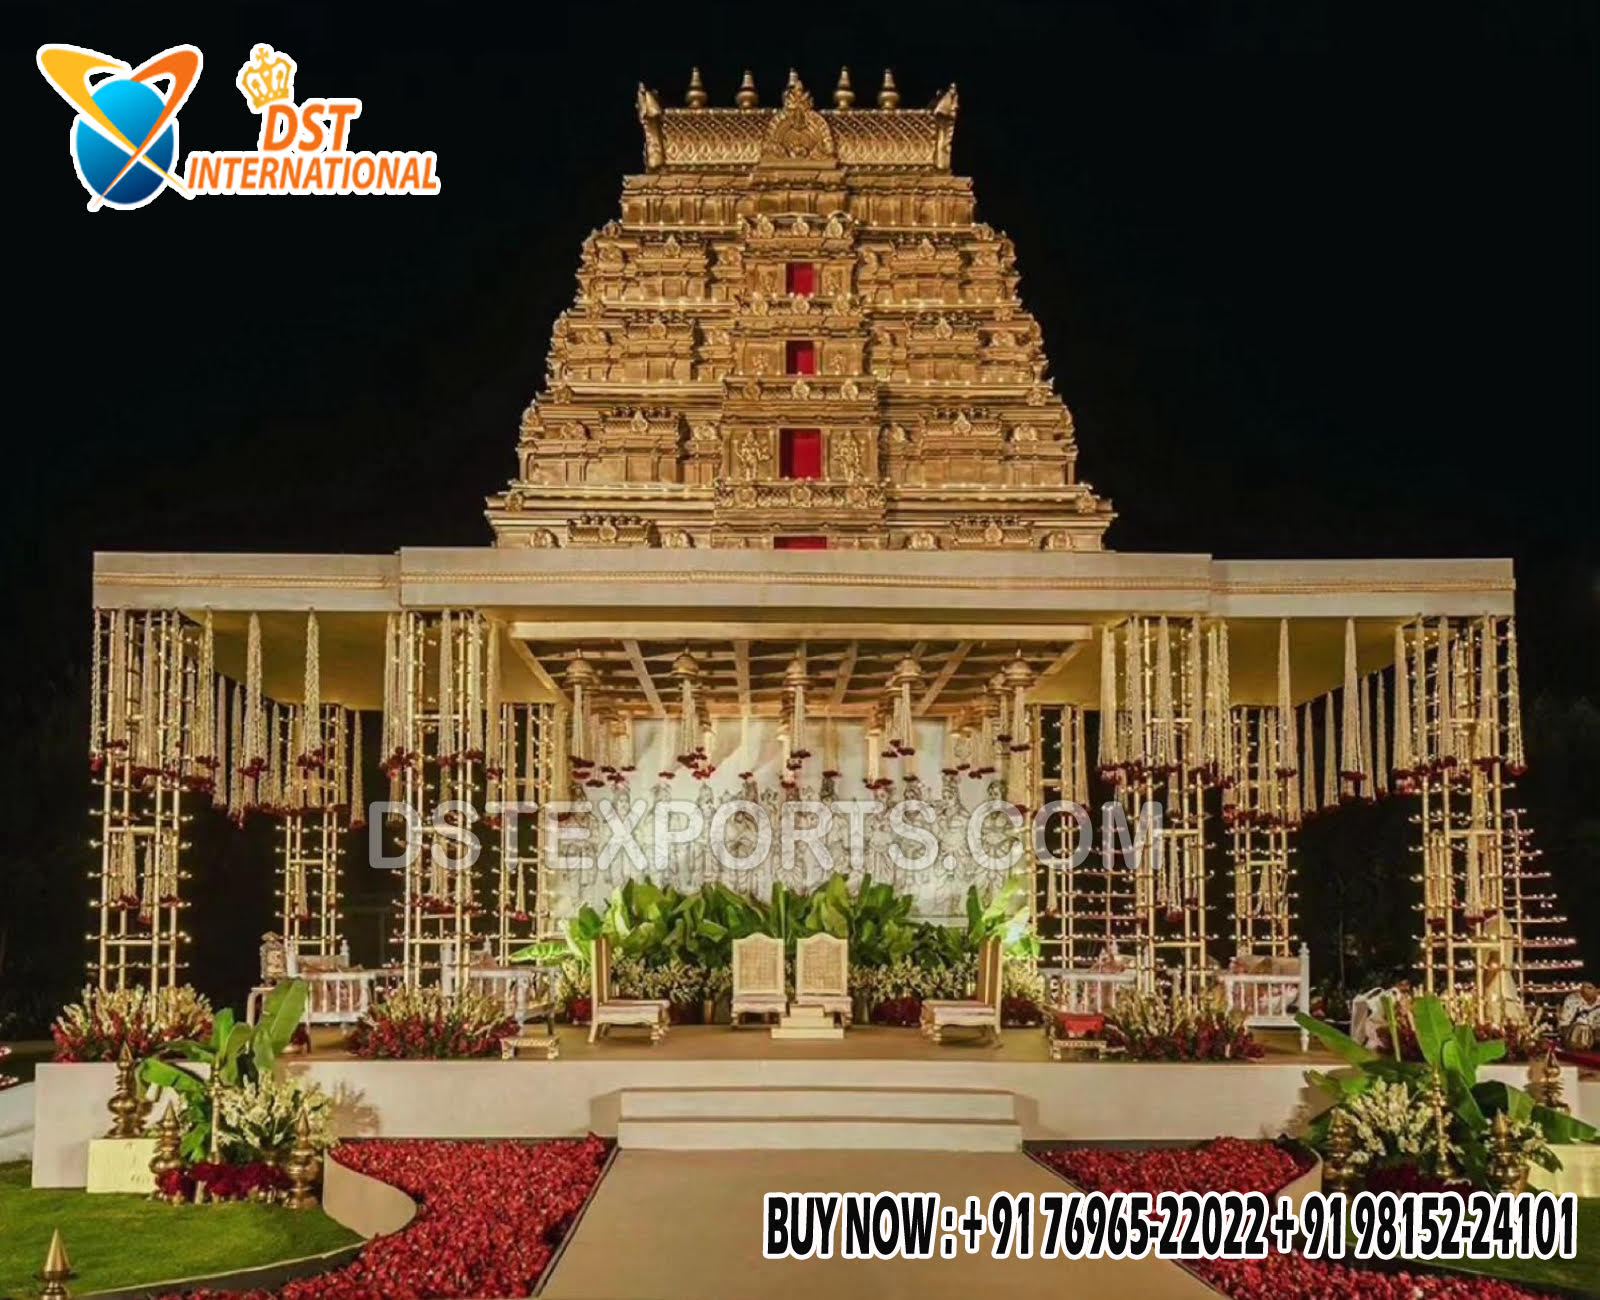 This Mandap Pillars are made of High quality Metal And Top arcs & Dome Are made of unbreakable fiberglass.